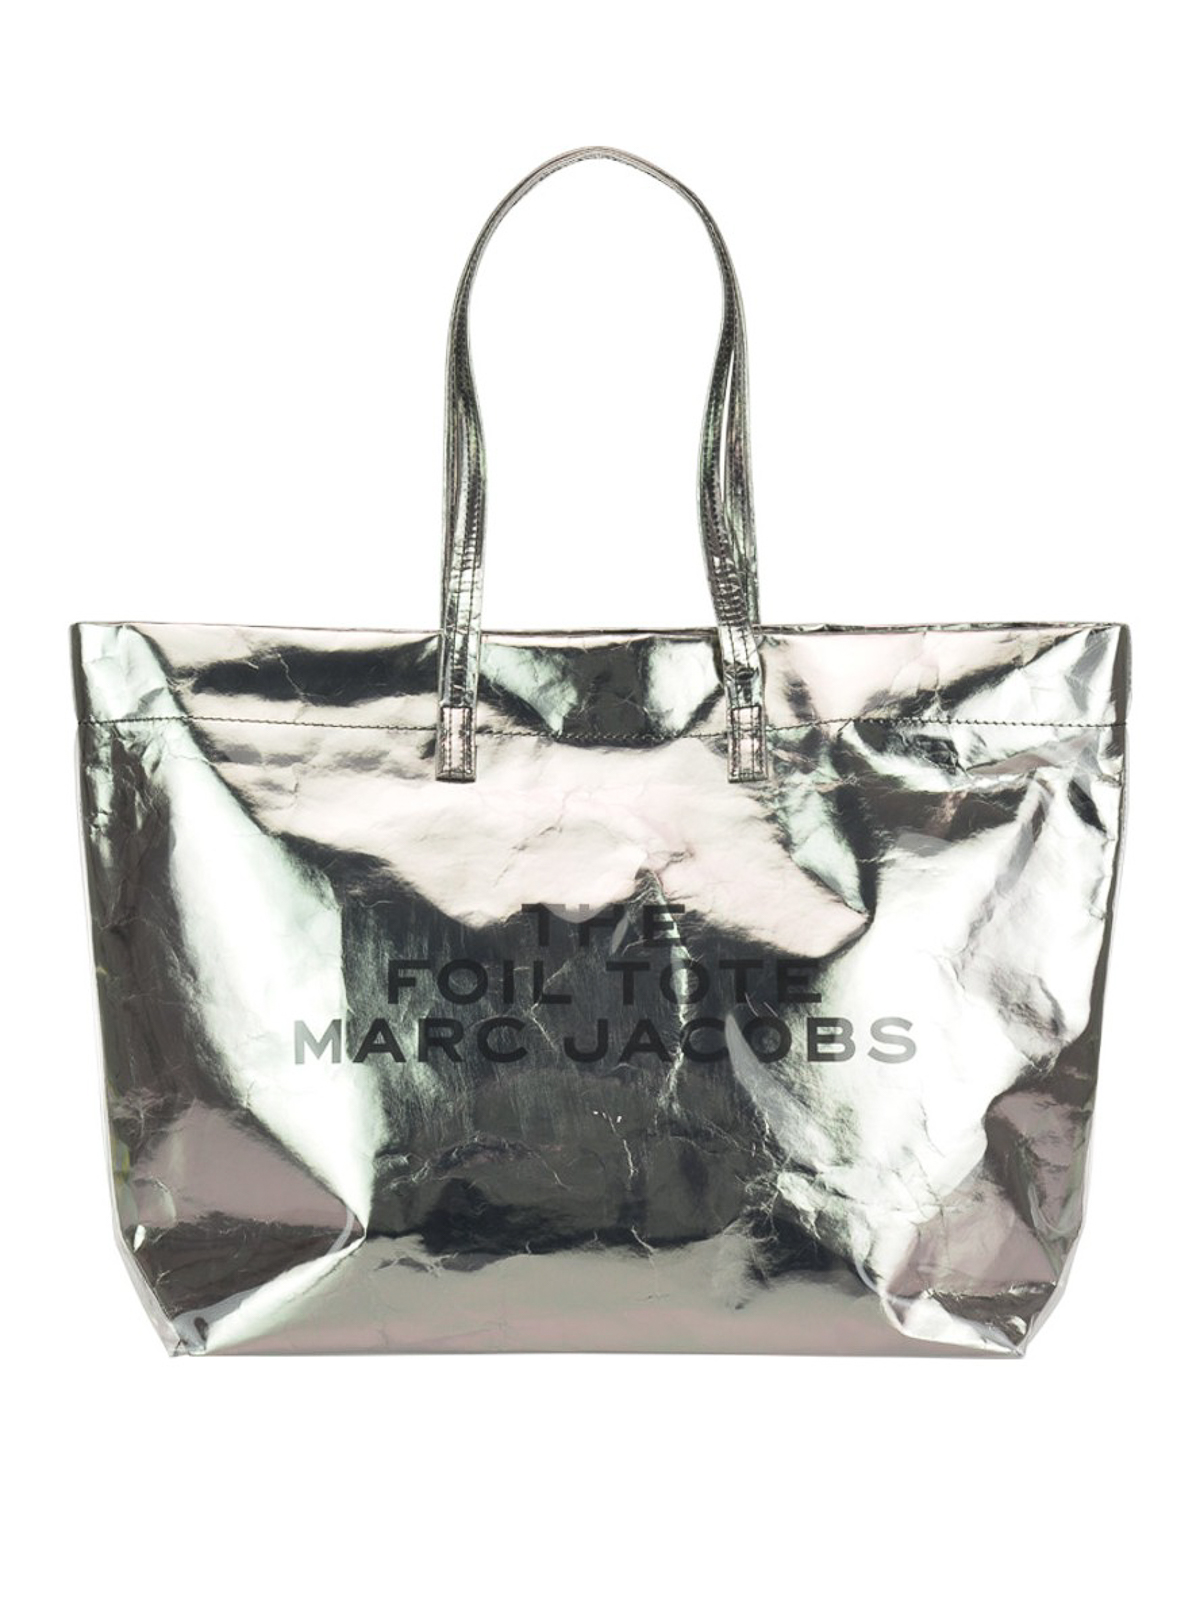 Totes bags Marc Jacobs - The Foil silver tech fabric tote bag - M0014874040